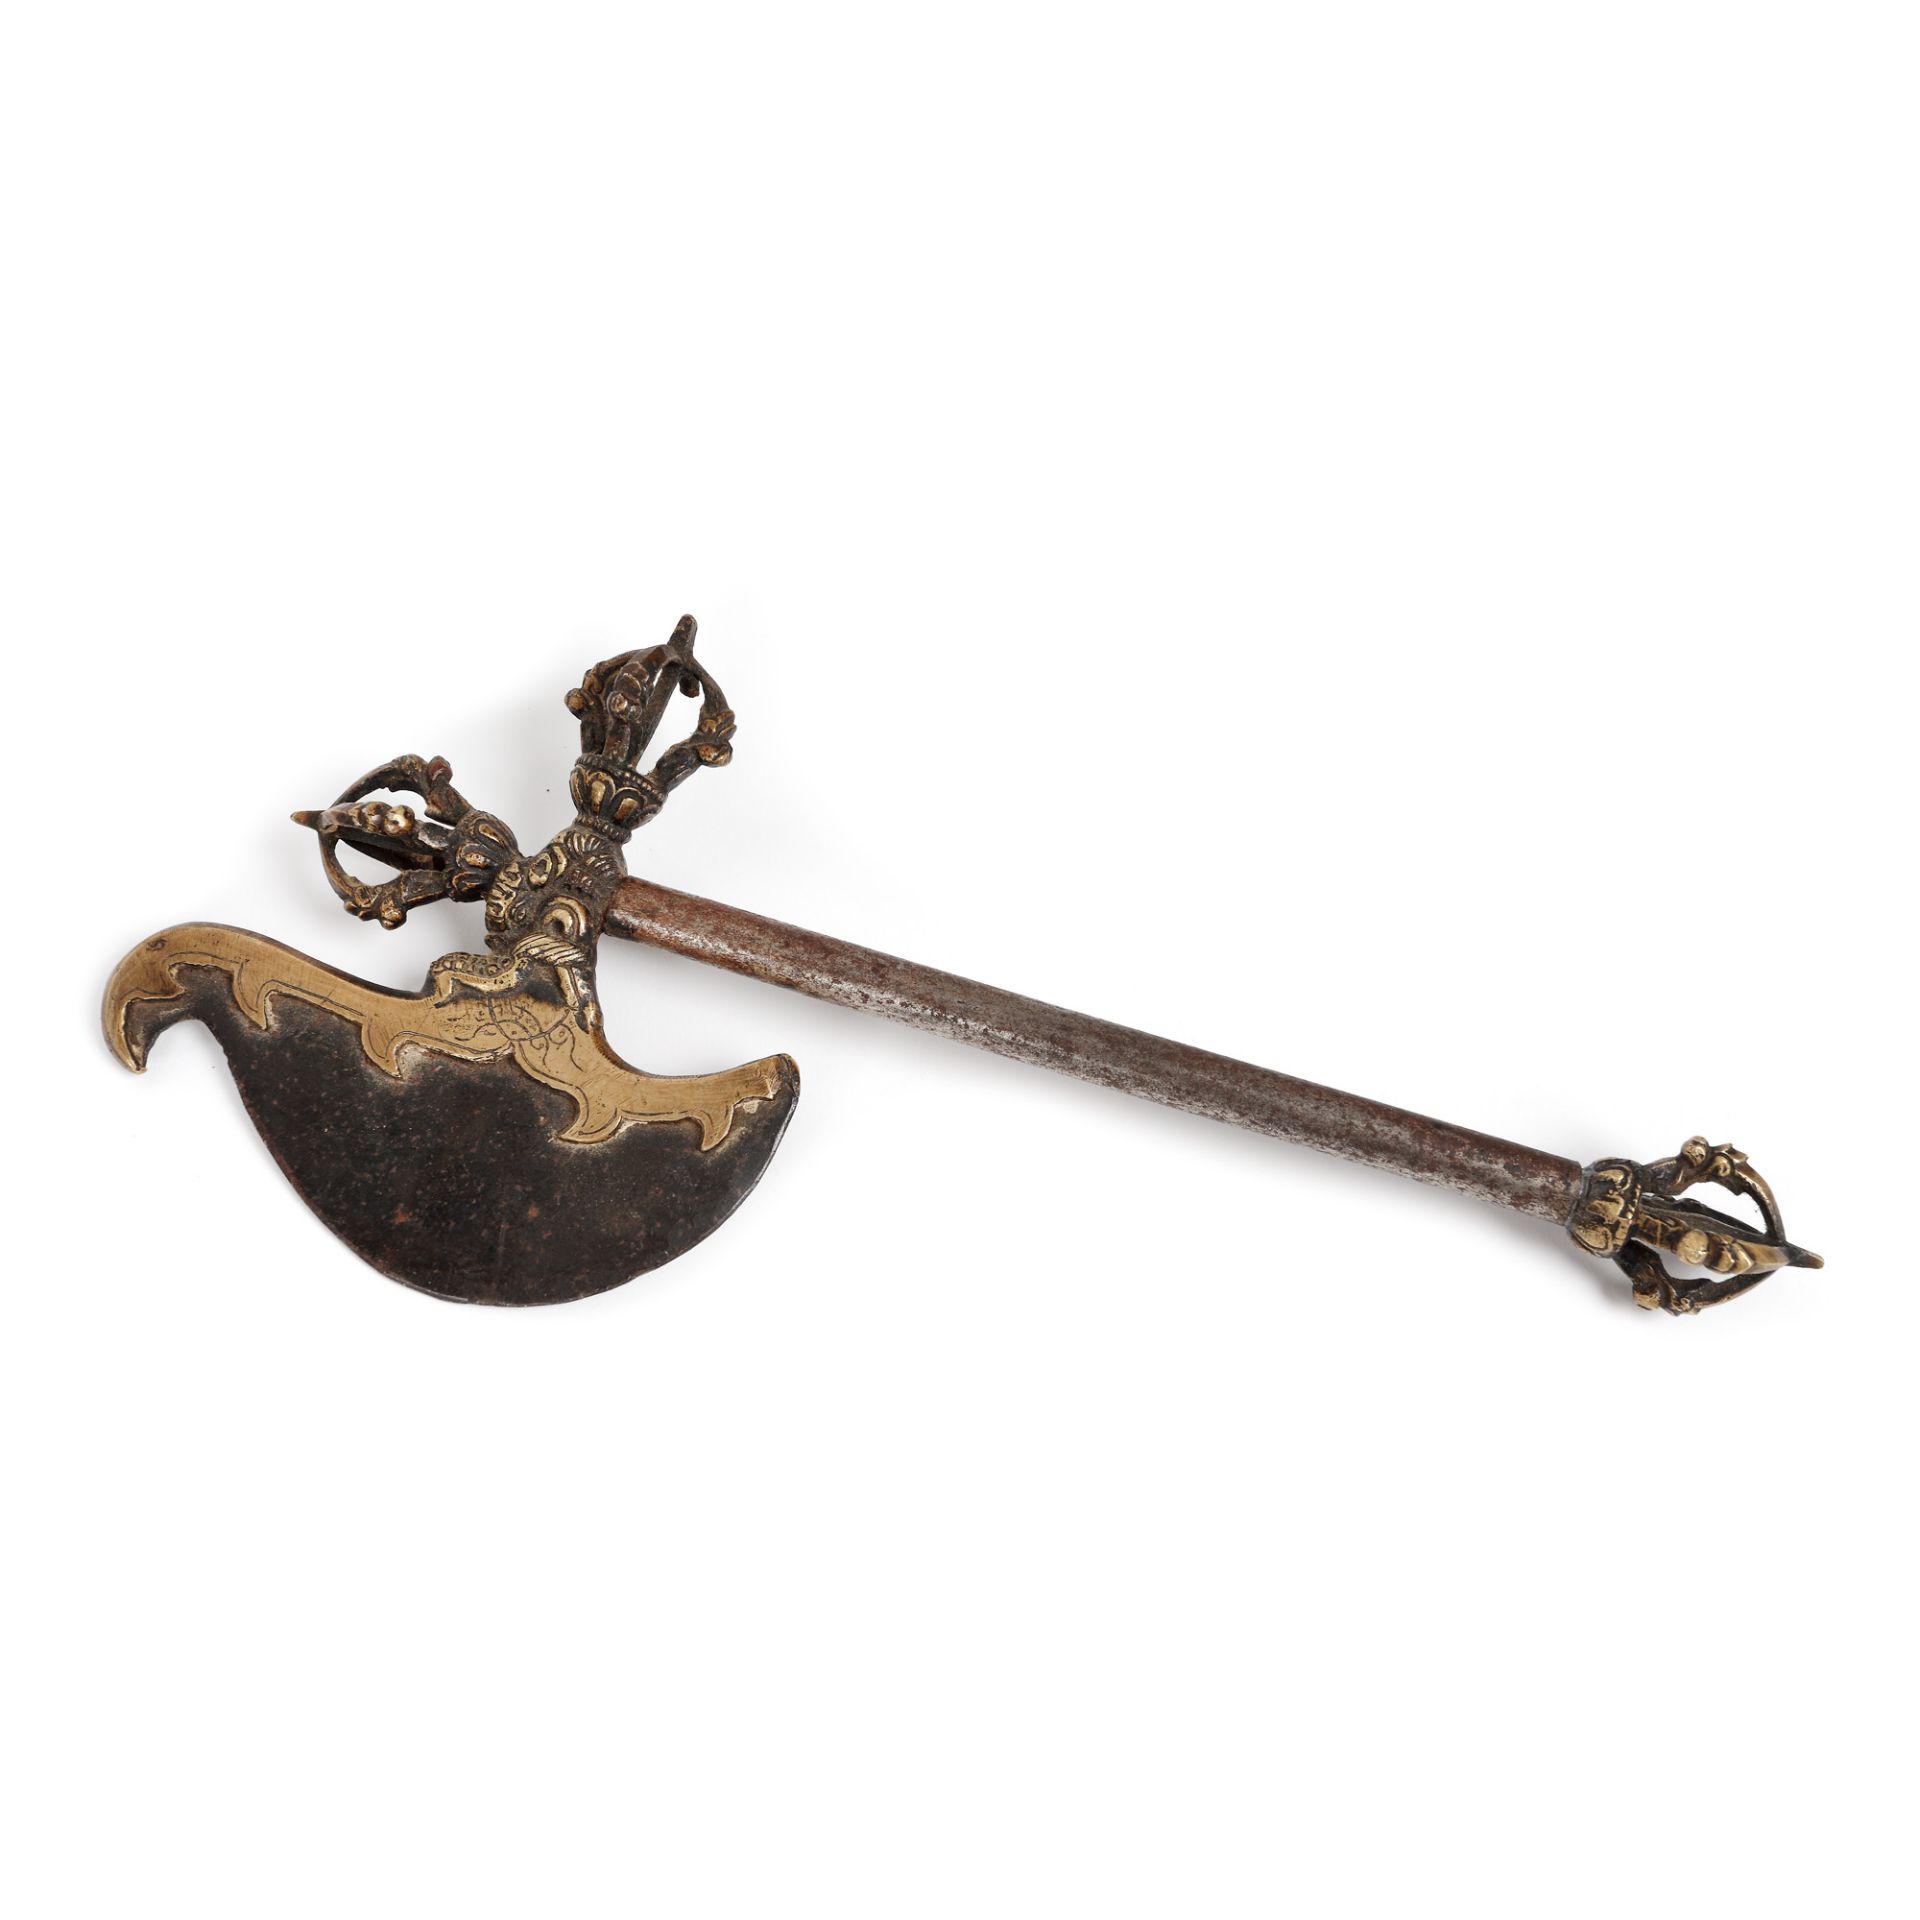 Tibetan ceremonial ax (kartika), with specific decoration, early 19th century